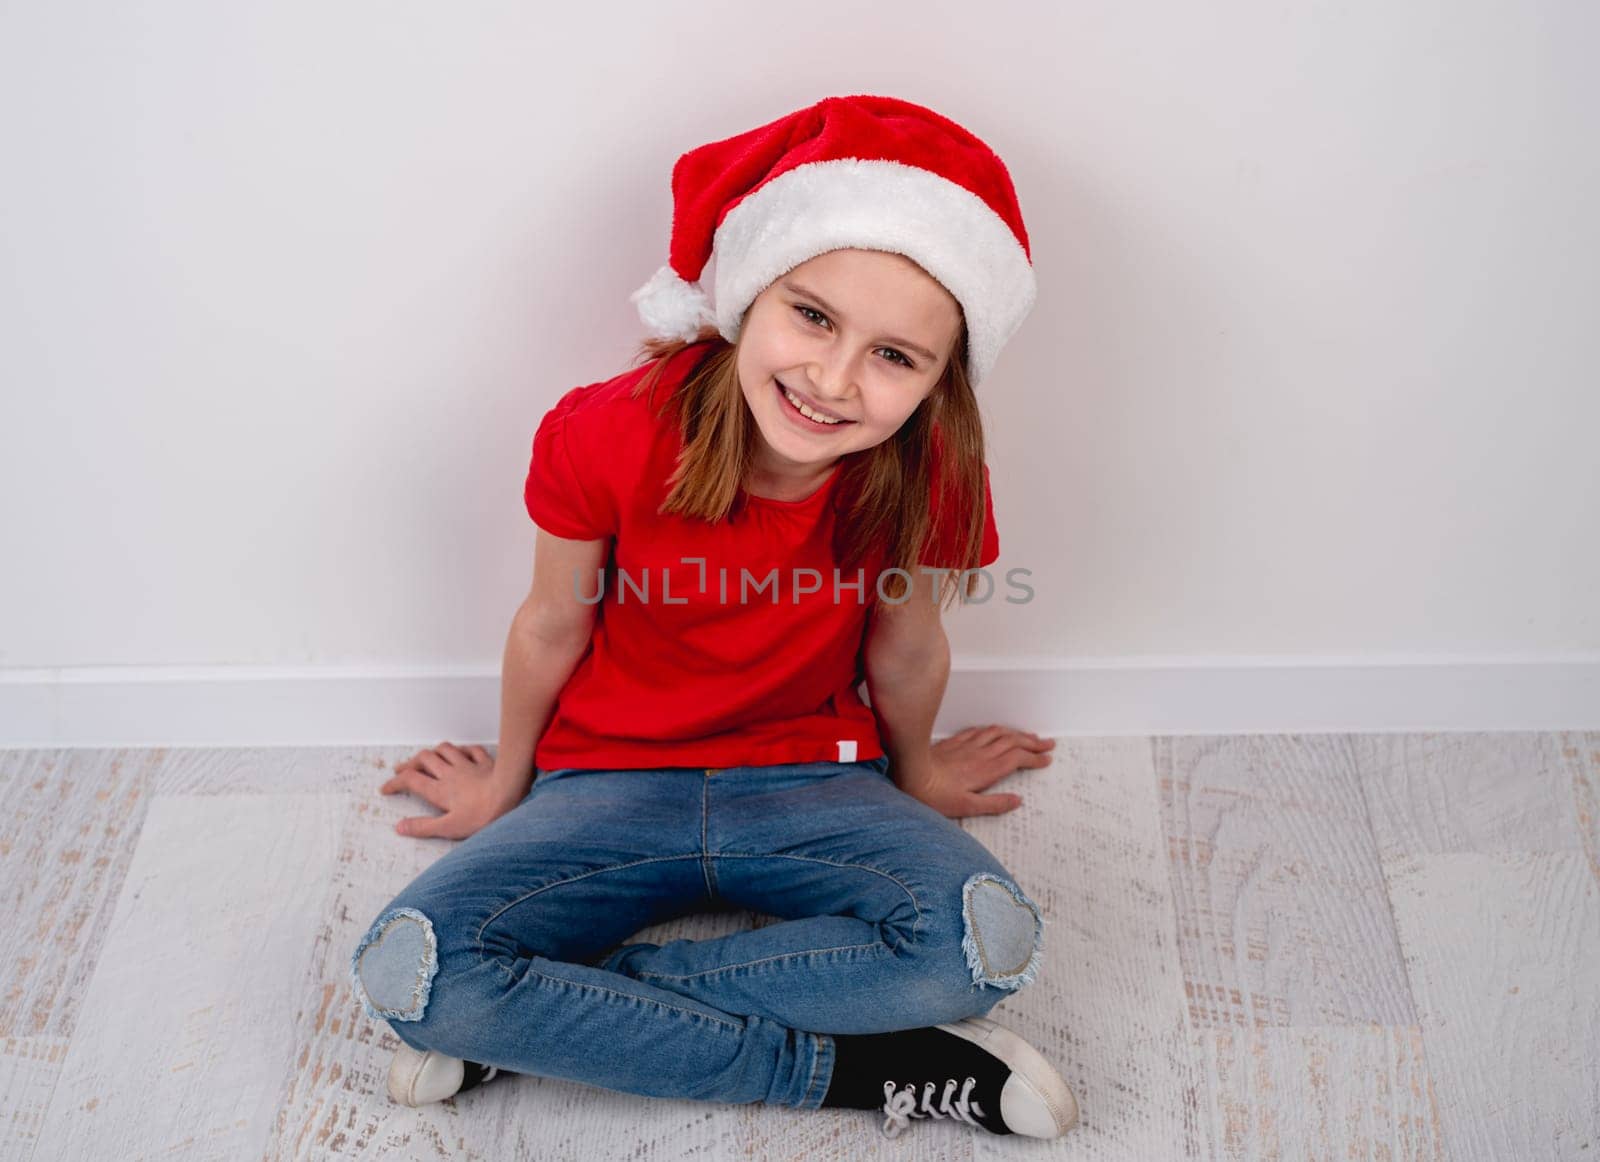 Little Girl In Red T-Shirt And Santa Hat Sits On Floor, Making For A Festive Photo On White Background